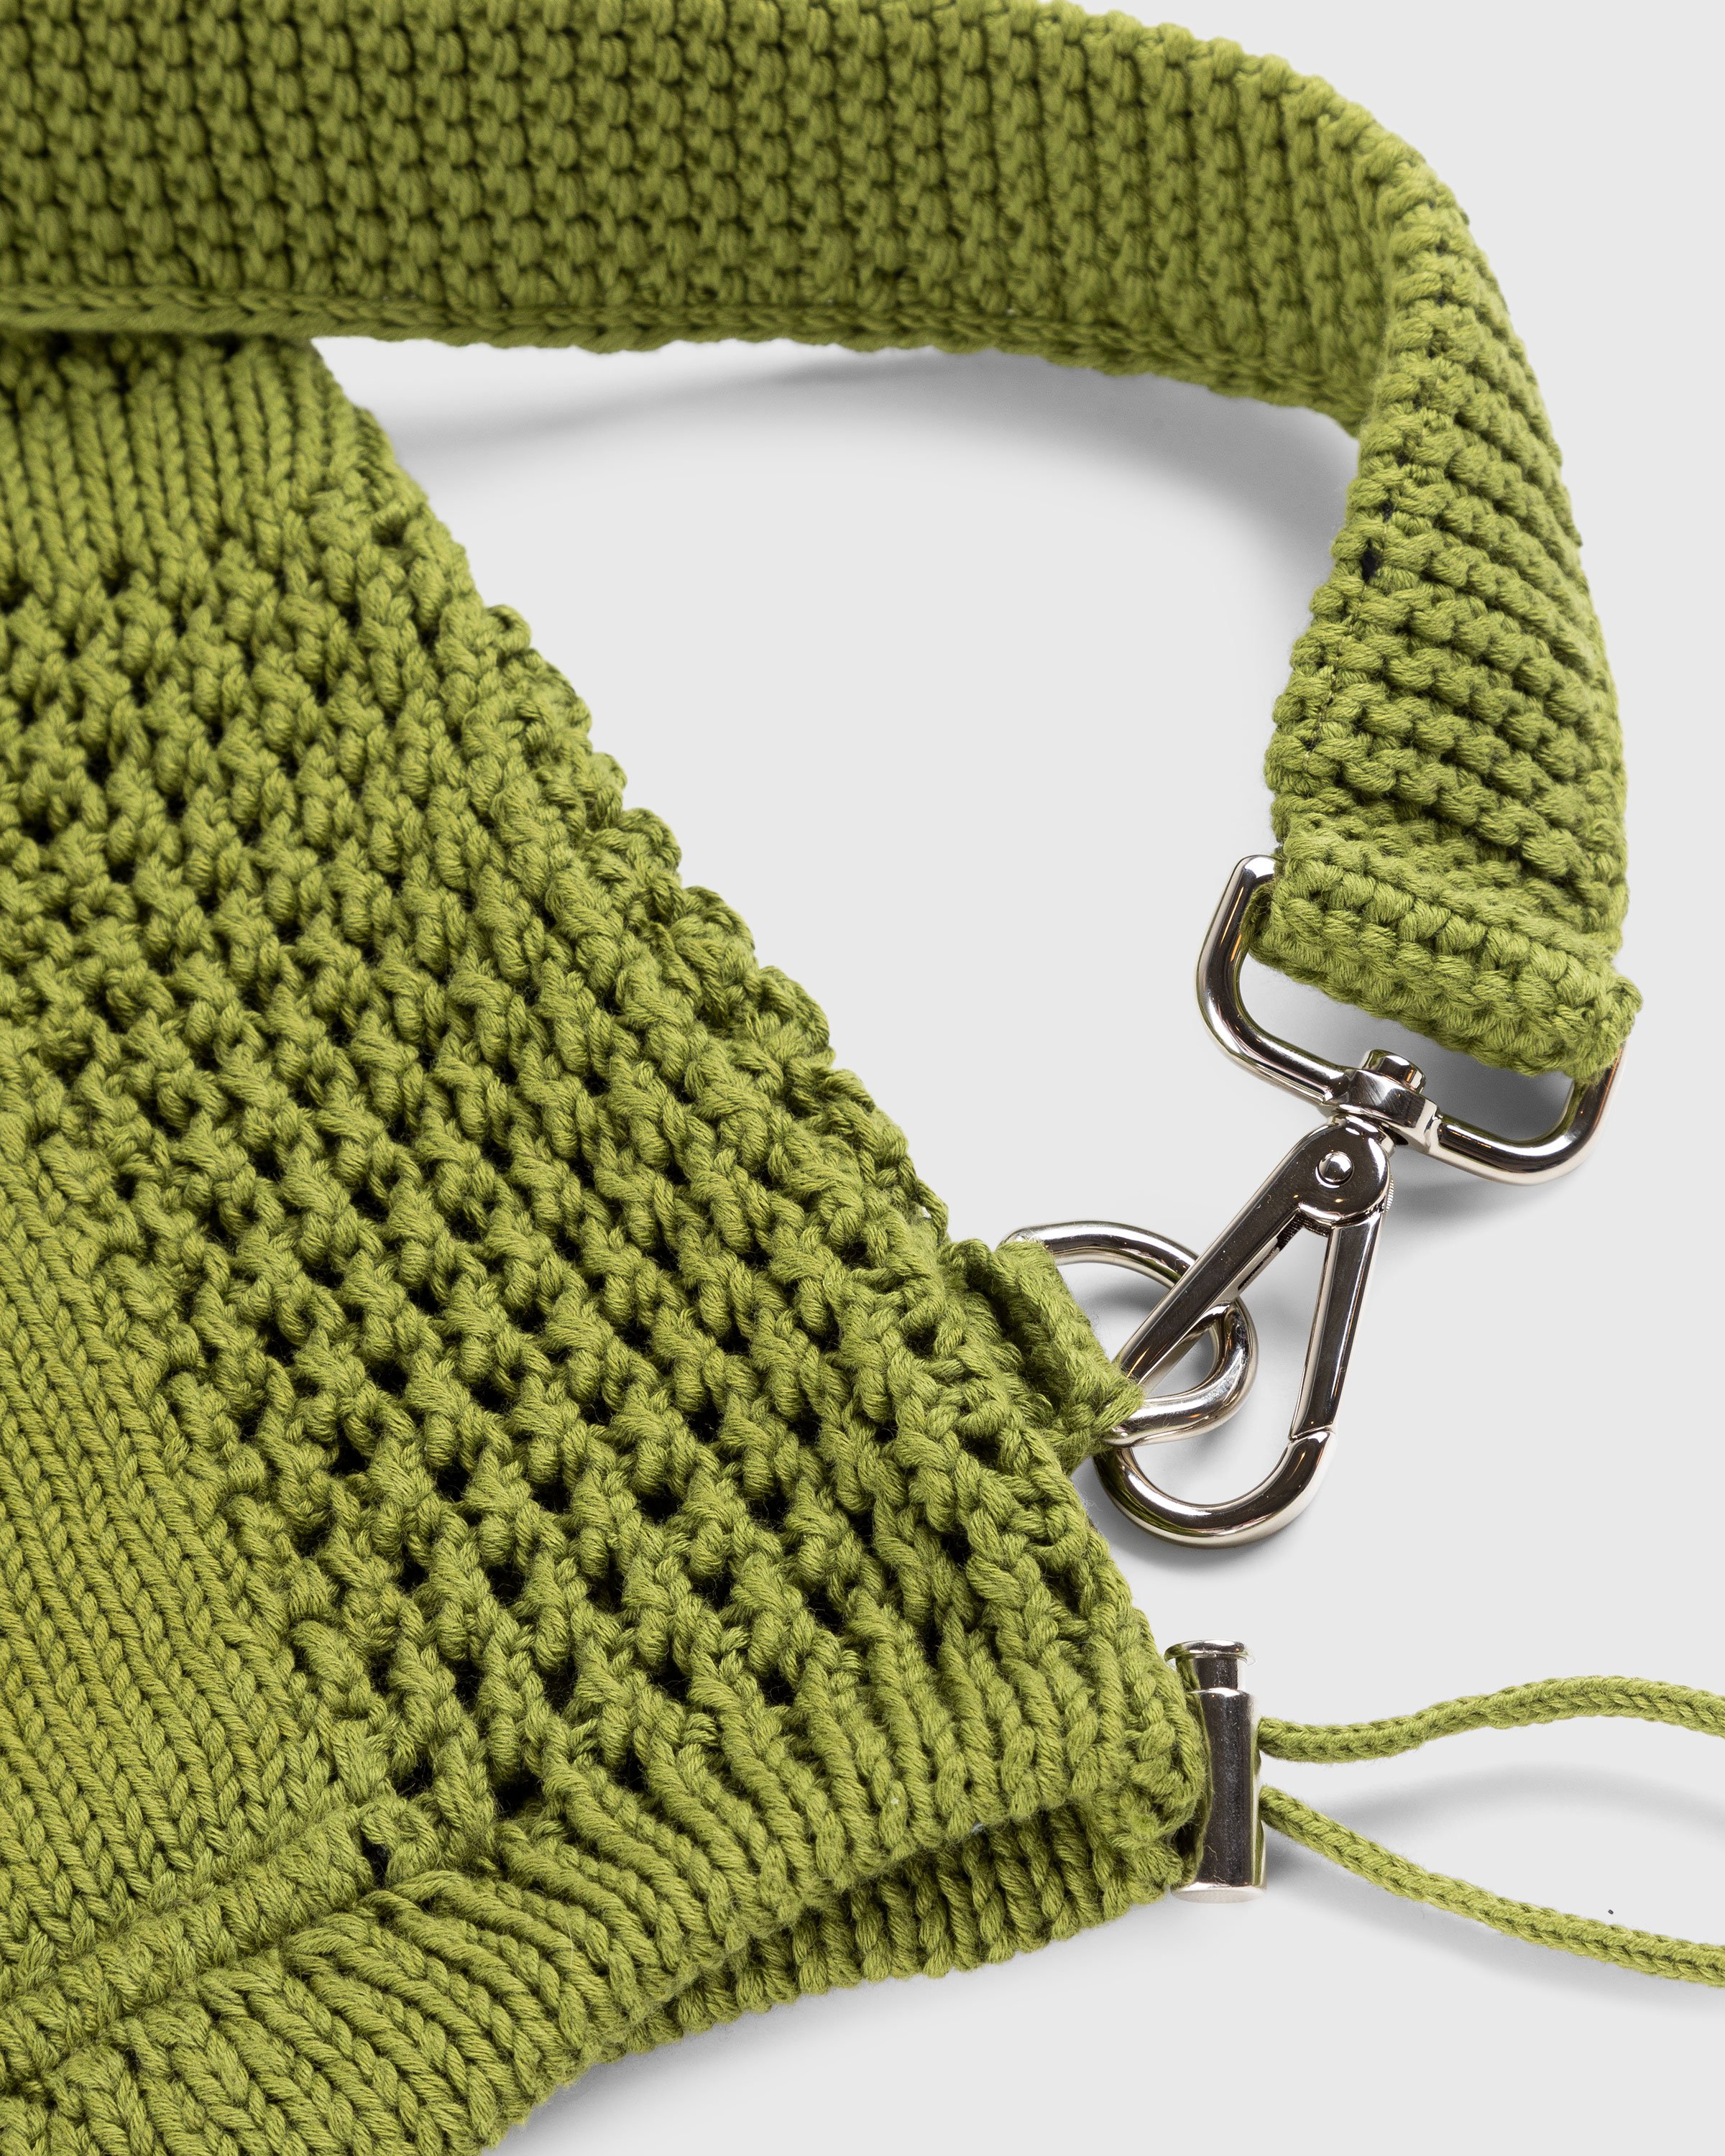 SSU - Mesh Stitch Knitted Bag Olive Green - Accessories - Green - Image 4